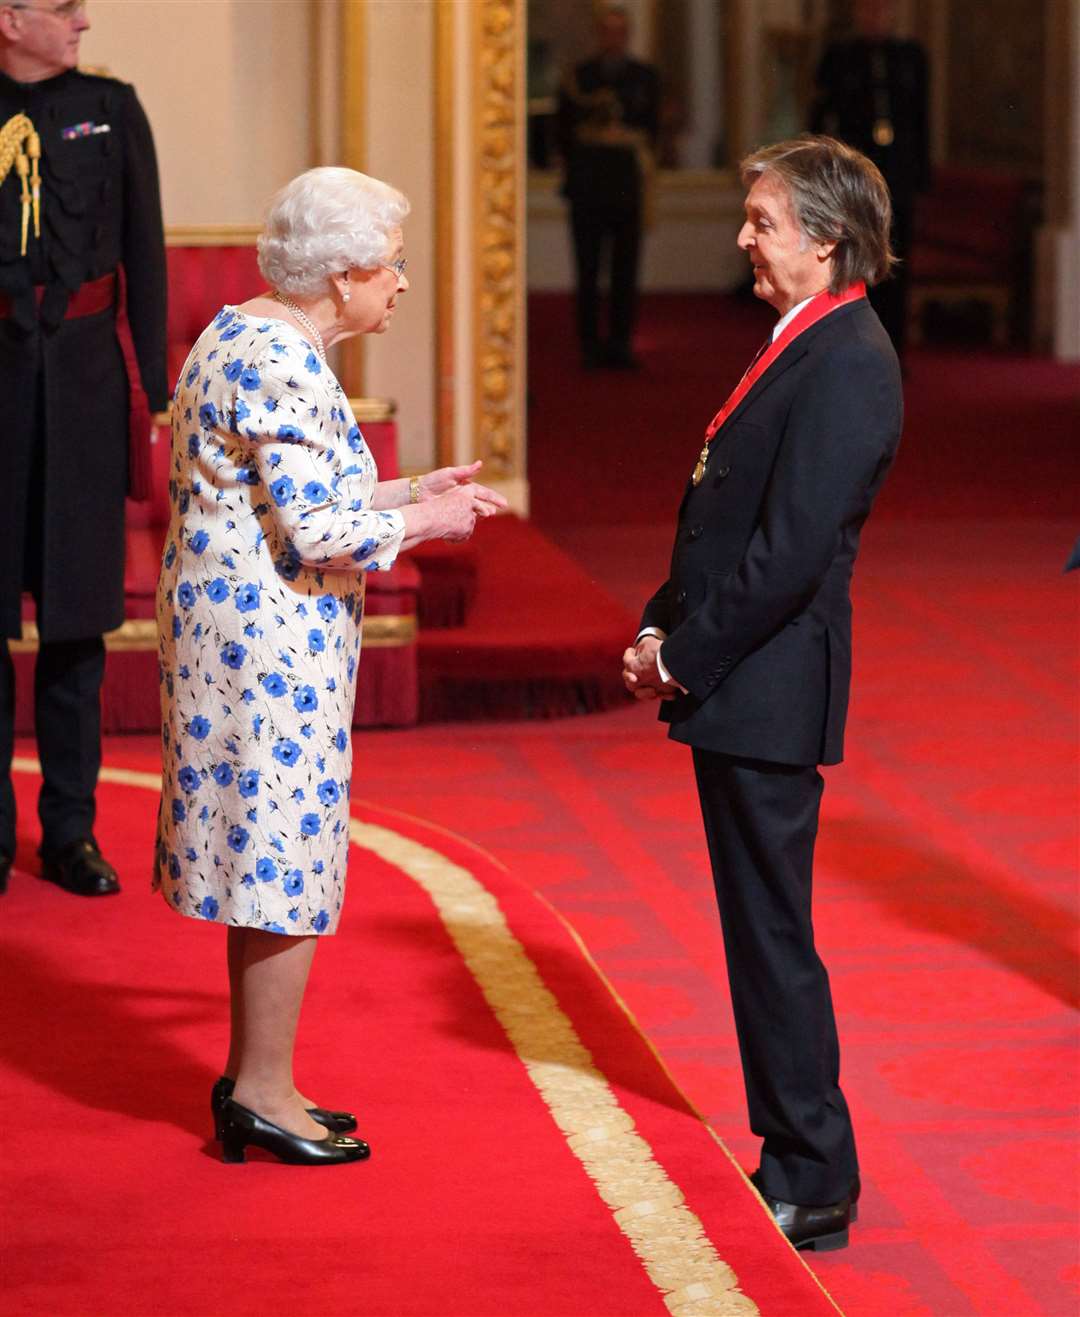 Sir Paul also praised the Queen’s “fabulous sense of humour” which he recalled their final meeting in 2018 (Yui Mok/PA)